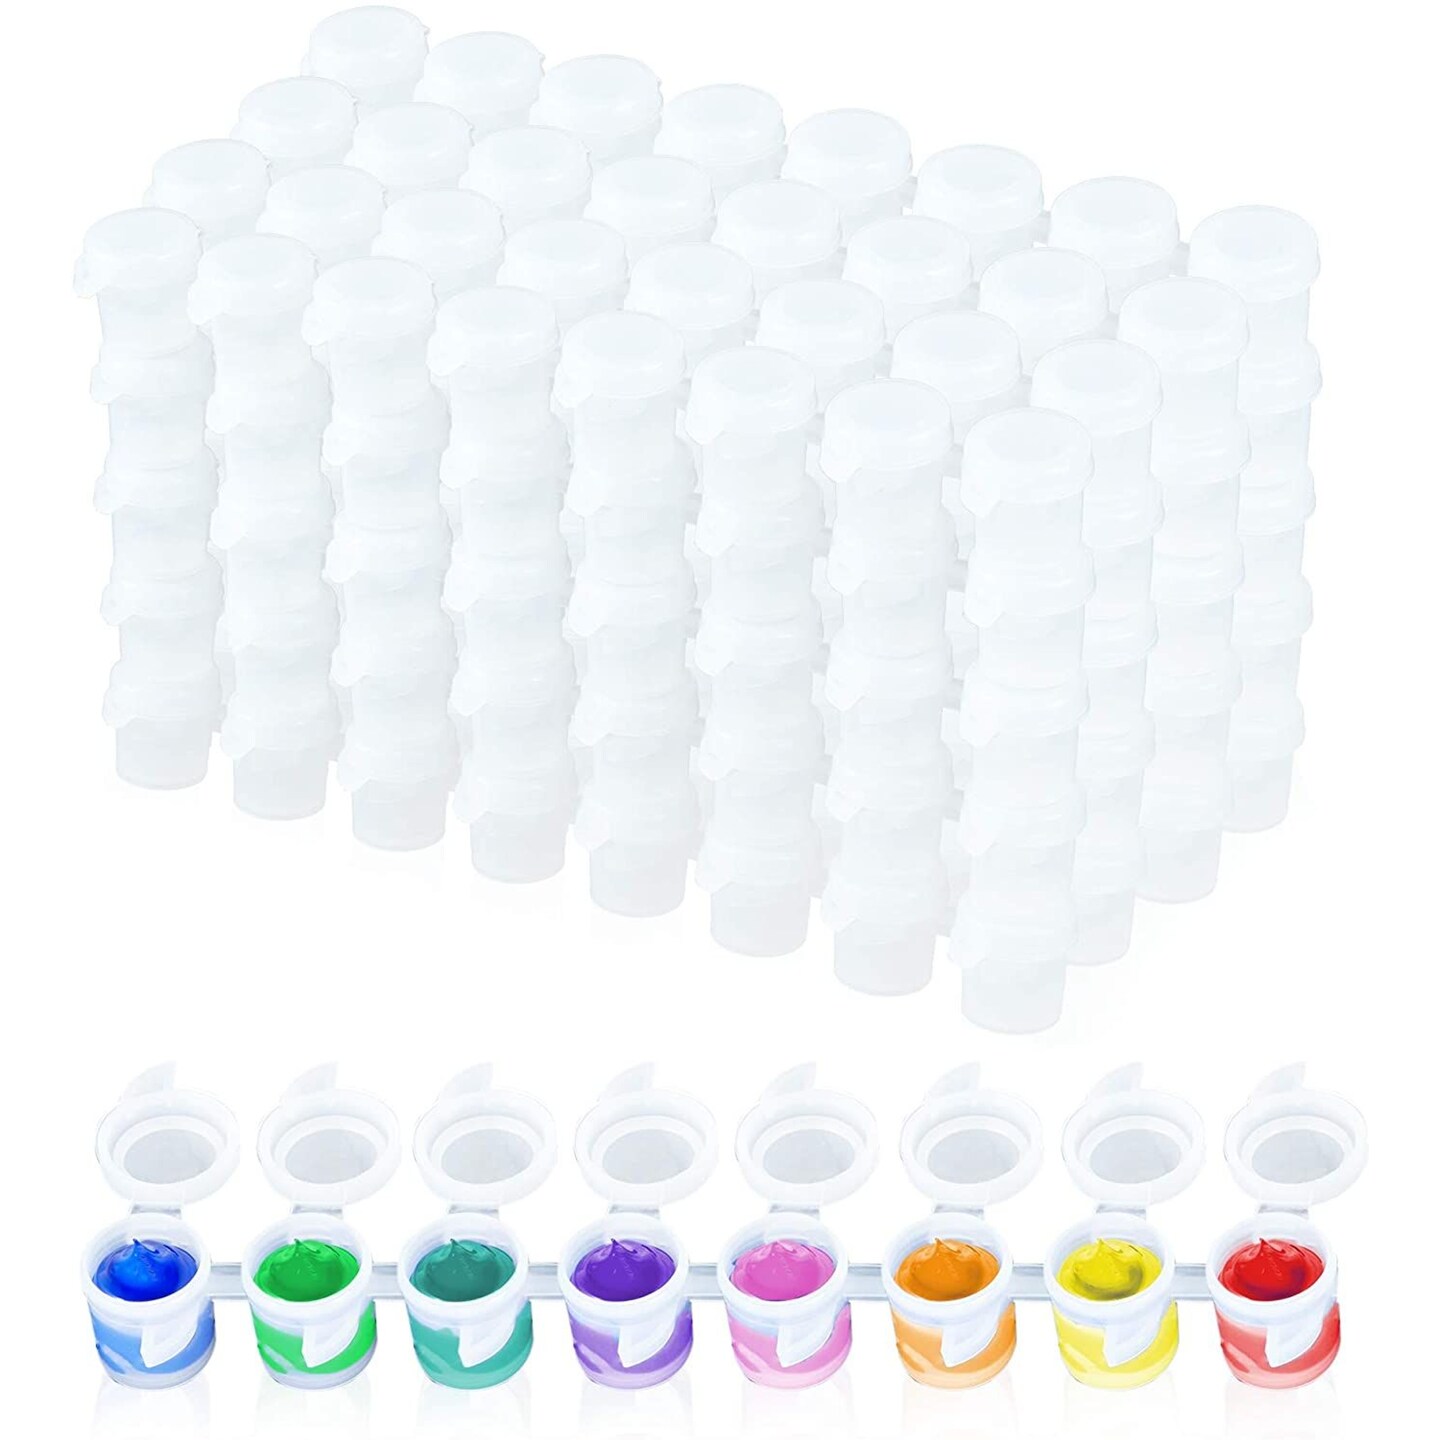 12 Pack No Spill Paint Cups With Lids for Kids, Arts and Crafts Supplies  for Classrooms (4 Colors, 3 x 3 In) 